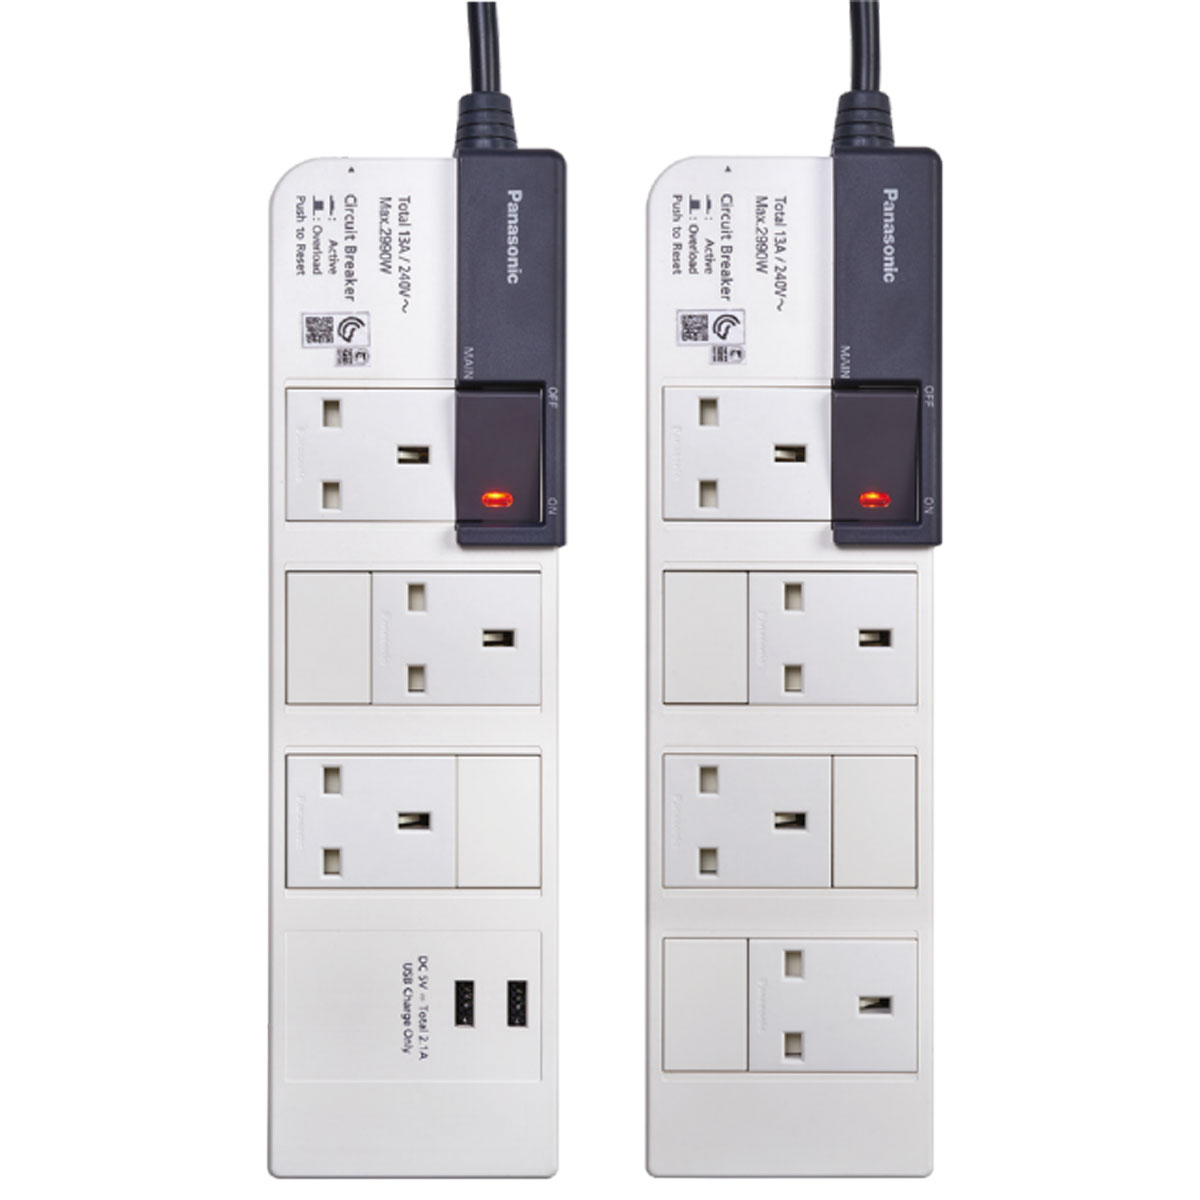 Two designs of Panasonic Extension Cords One with three sockets and two usb ports. Another model with four BS-flat pin sockets